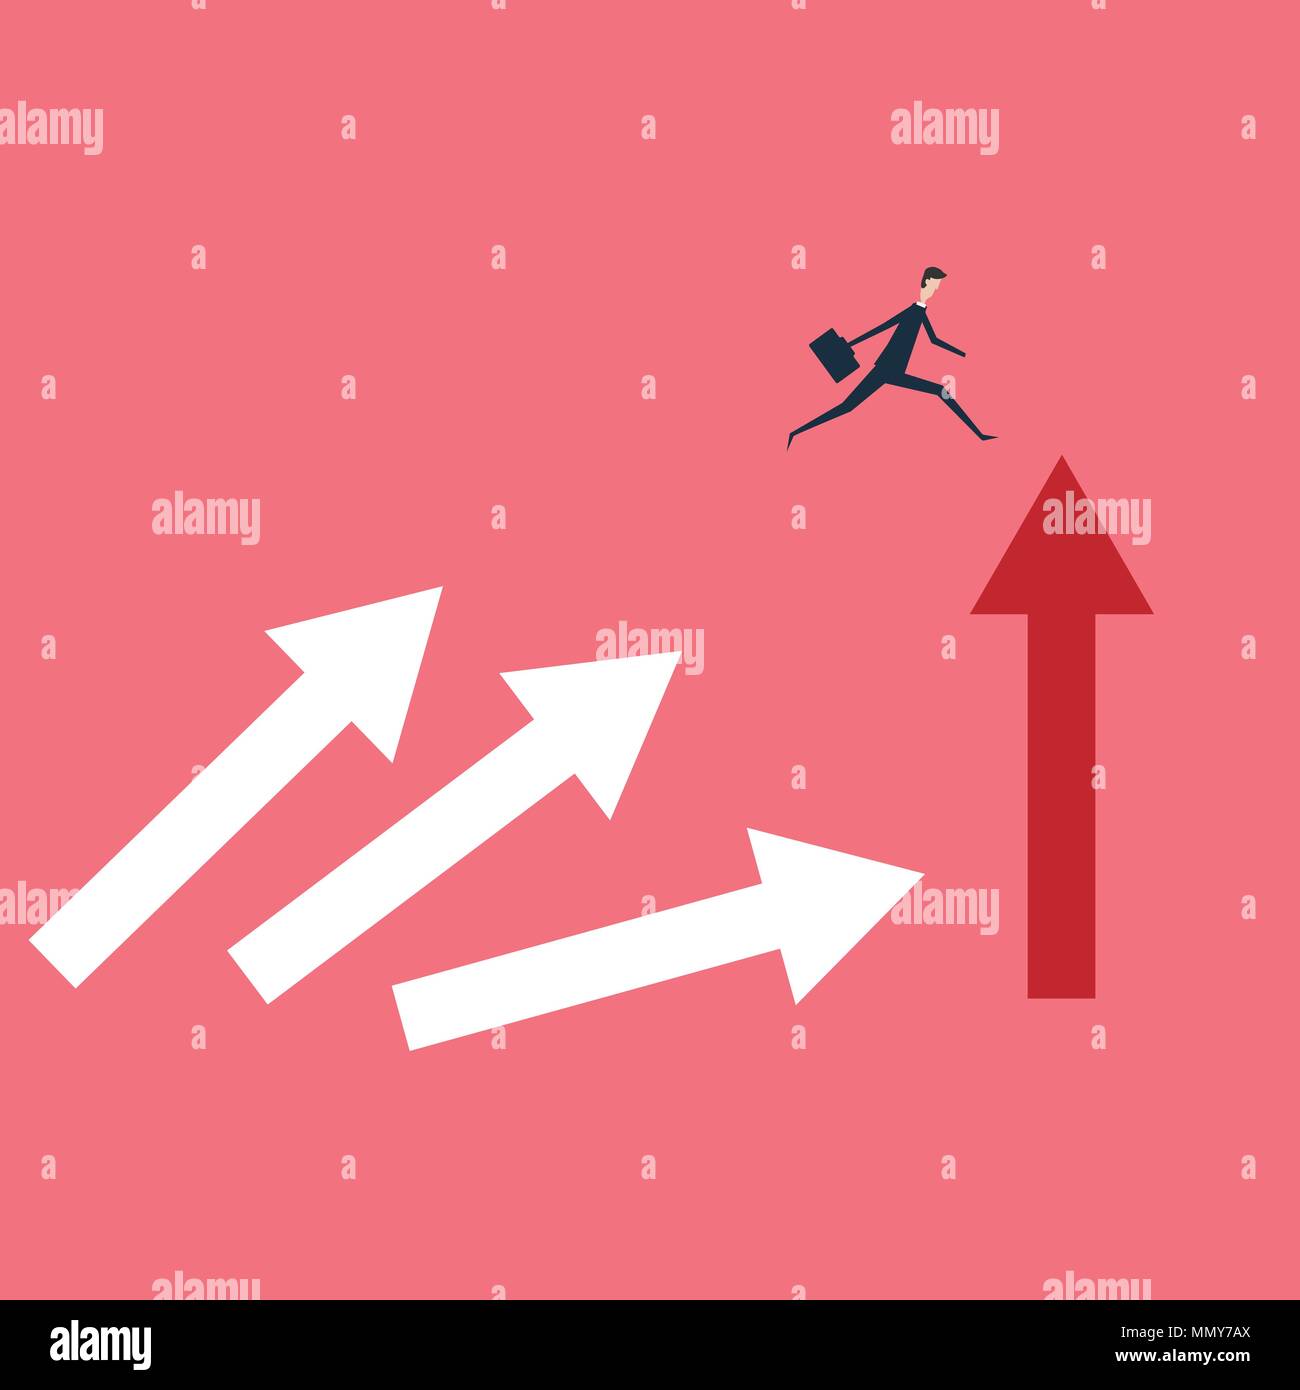 Minimalist stile. vector business finance. businessman jumping over chasm vector concept. Symbol of business success, challenge, risk, courage Stock Vector